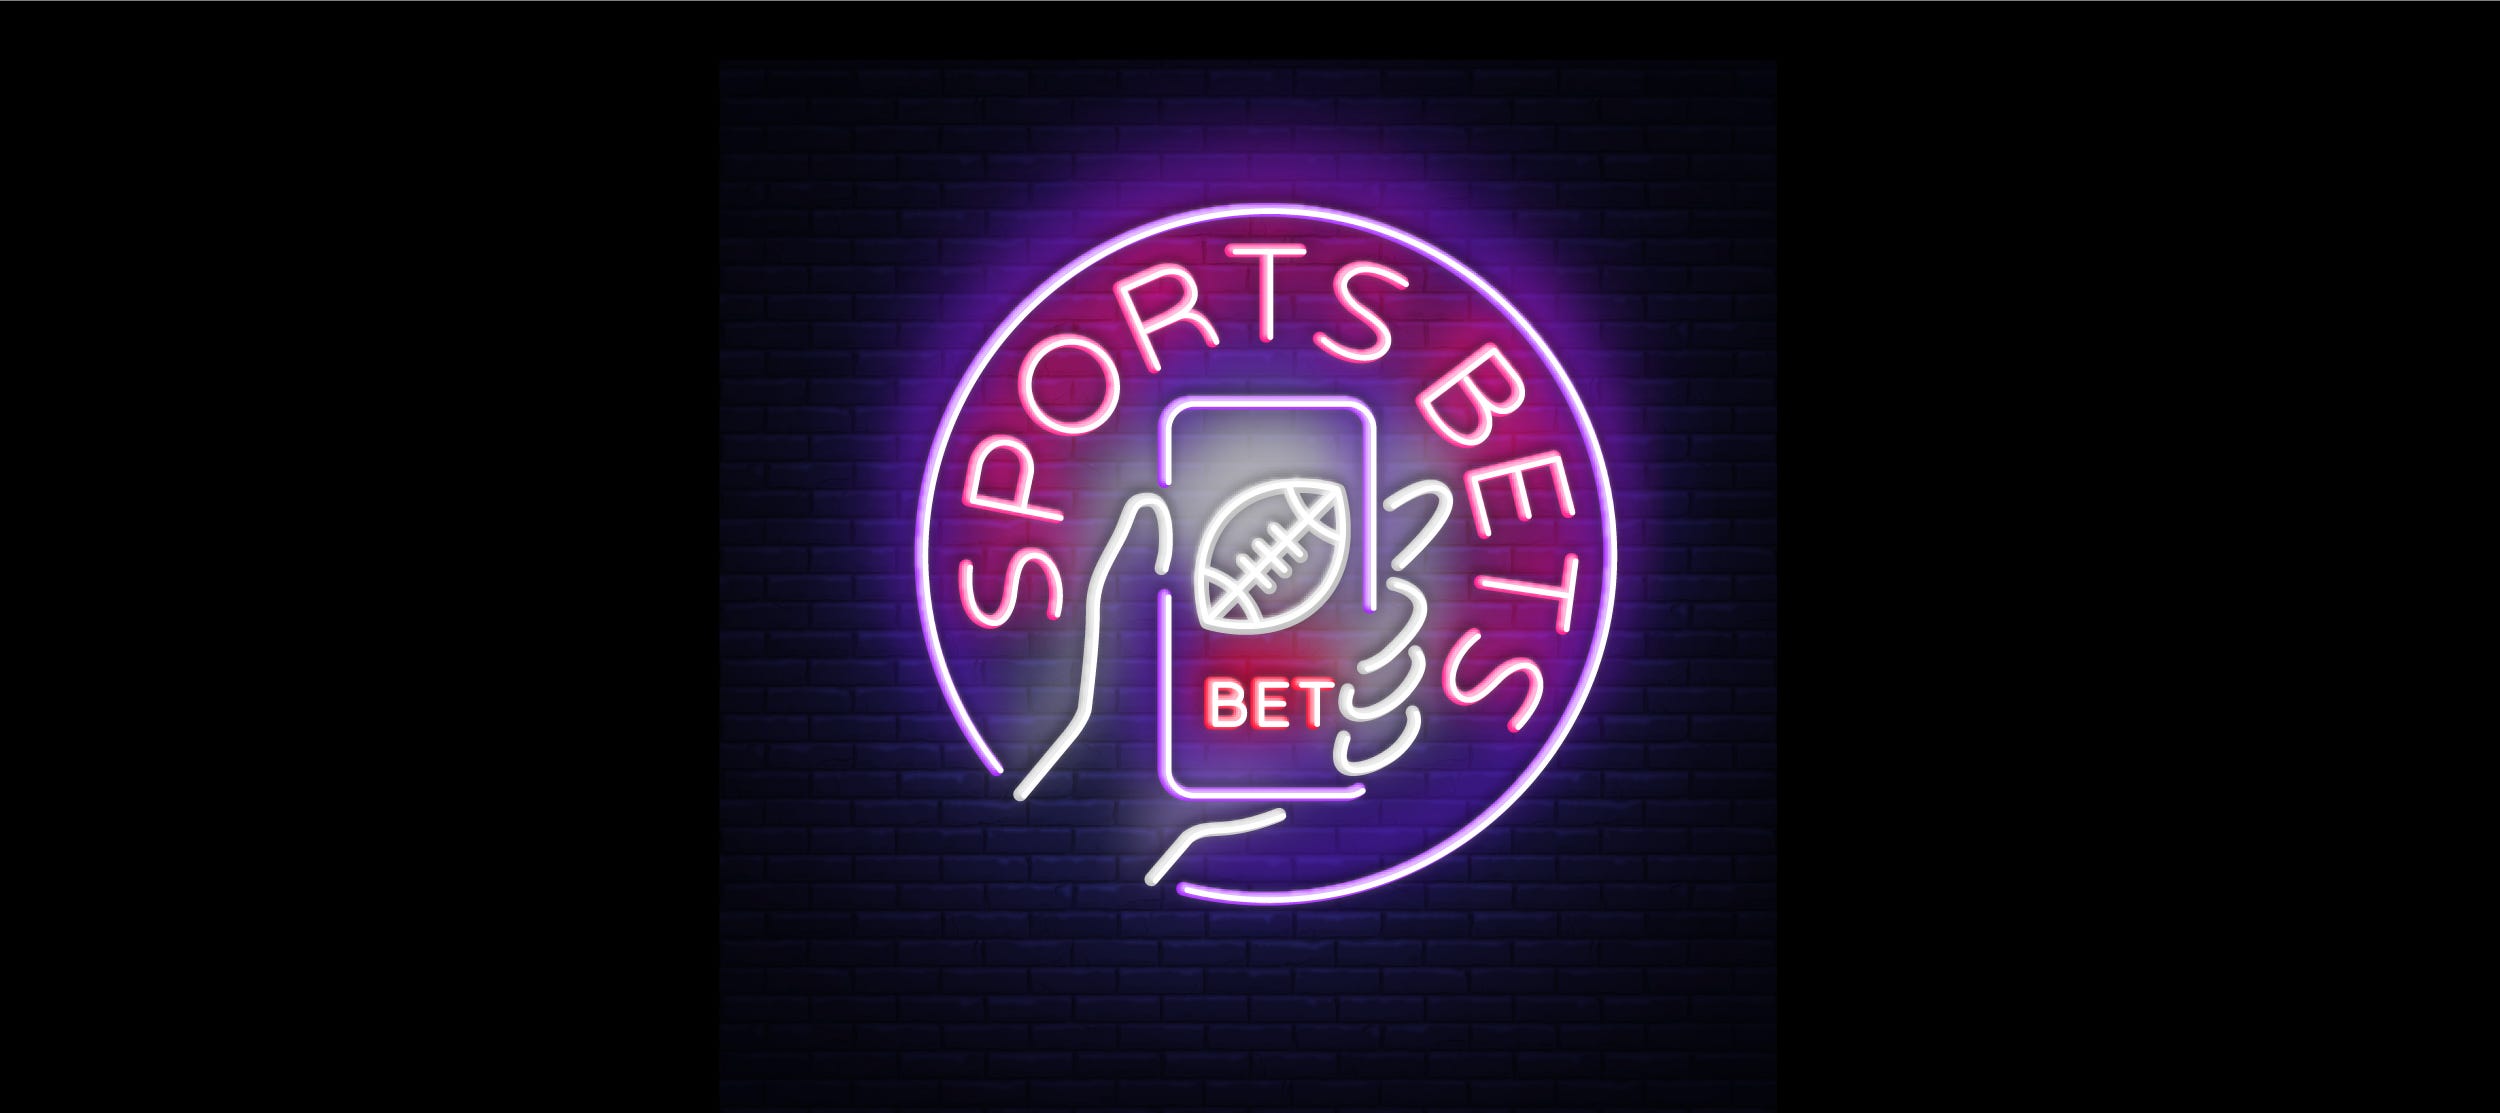 Best Sport Betting Site: What A Mistake!